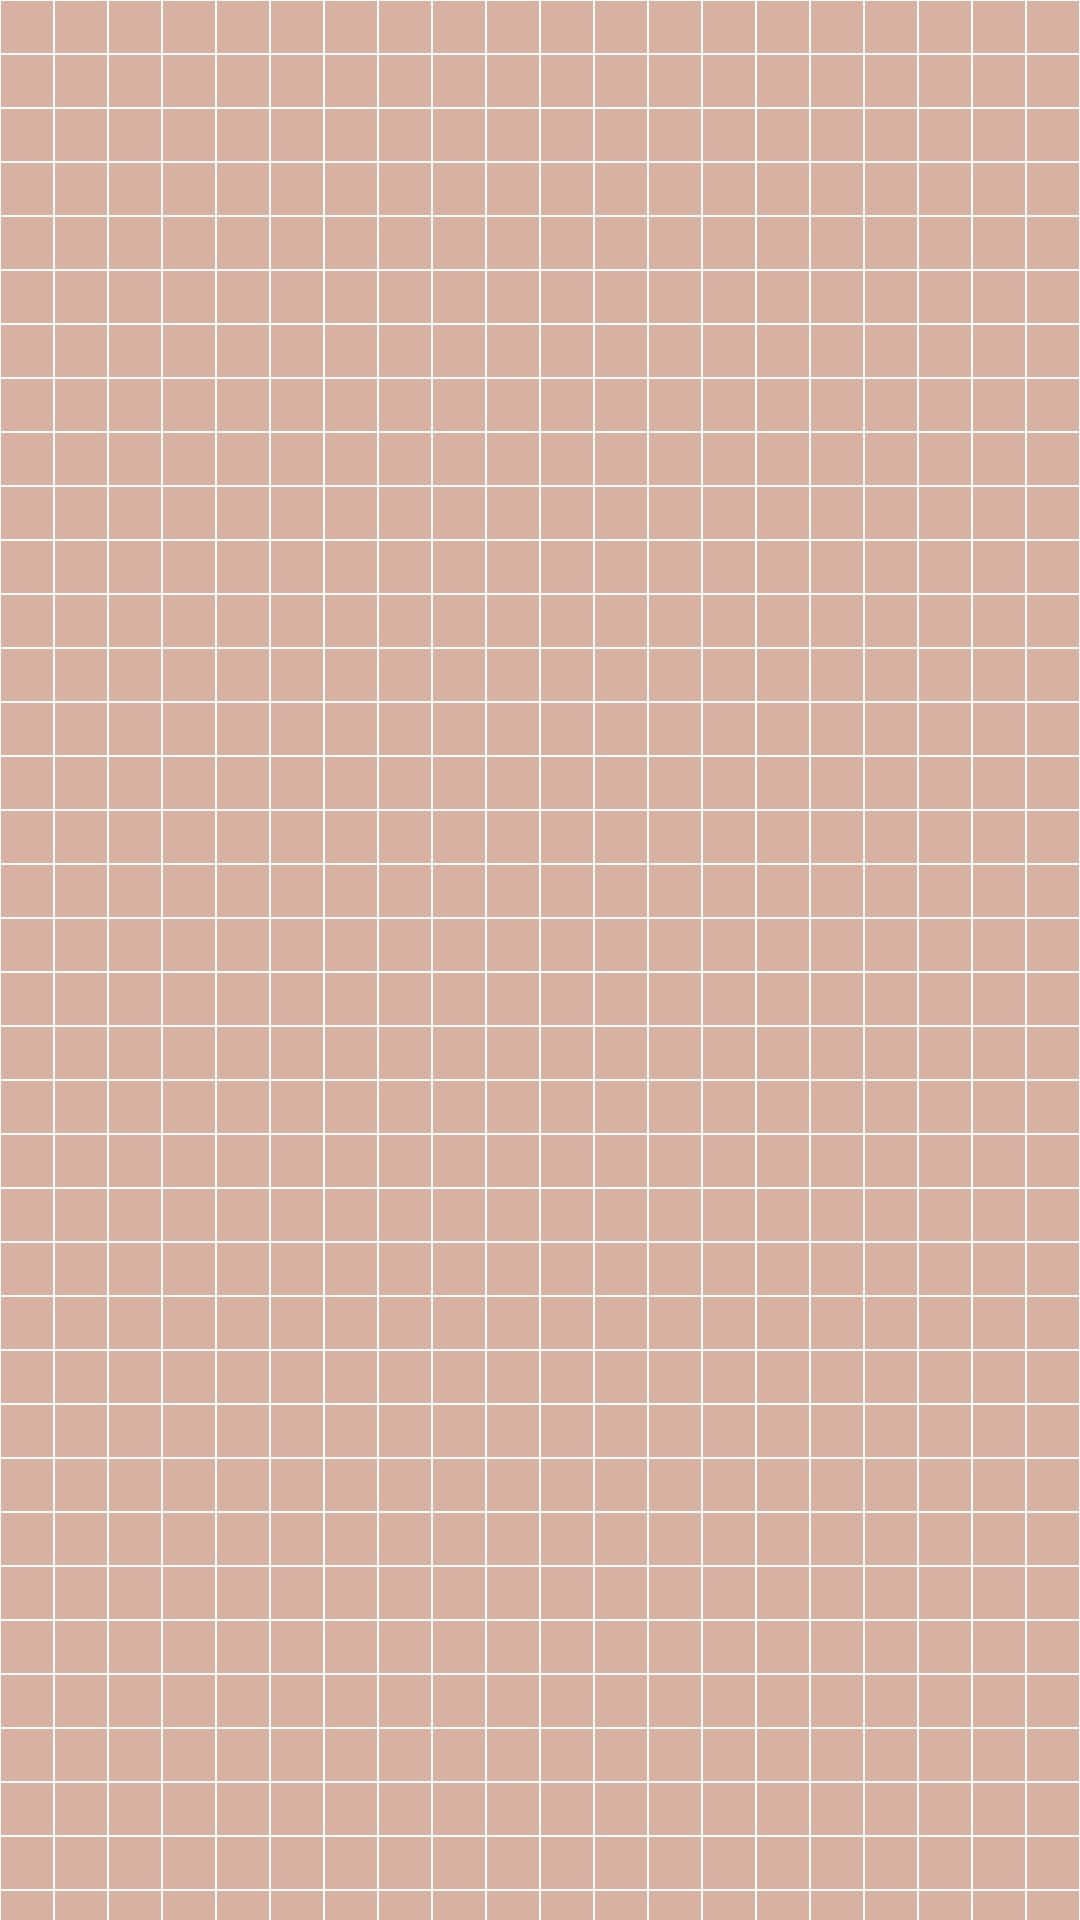 Grid 1080 X 1920 Picture